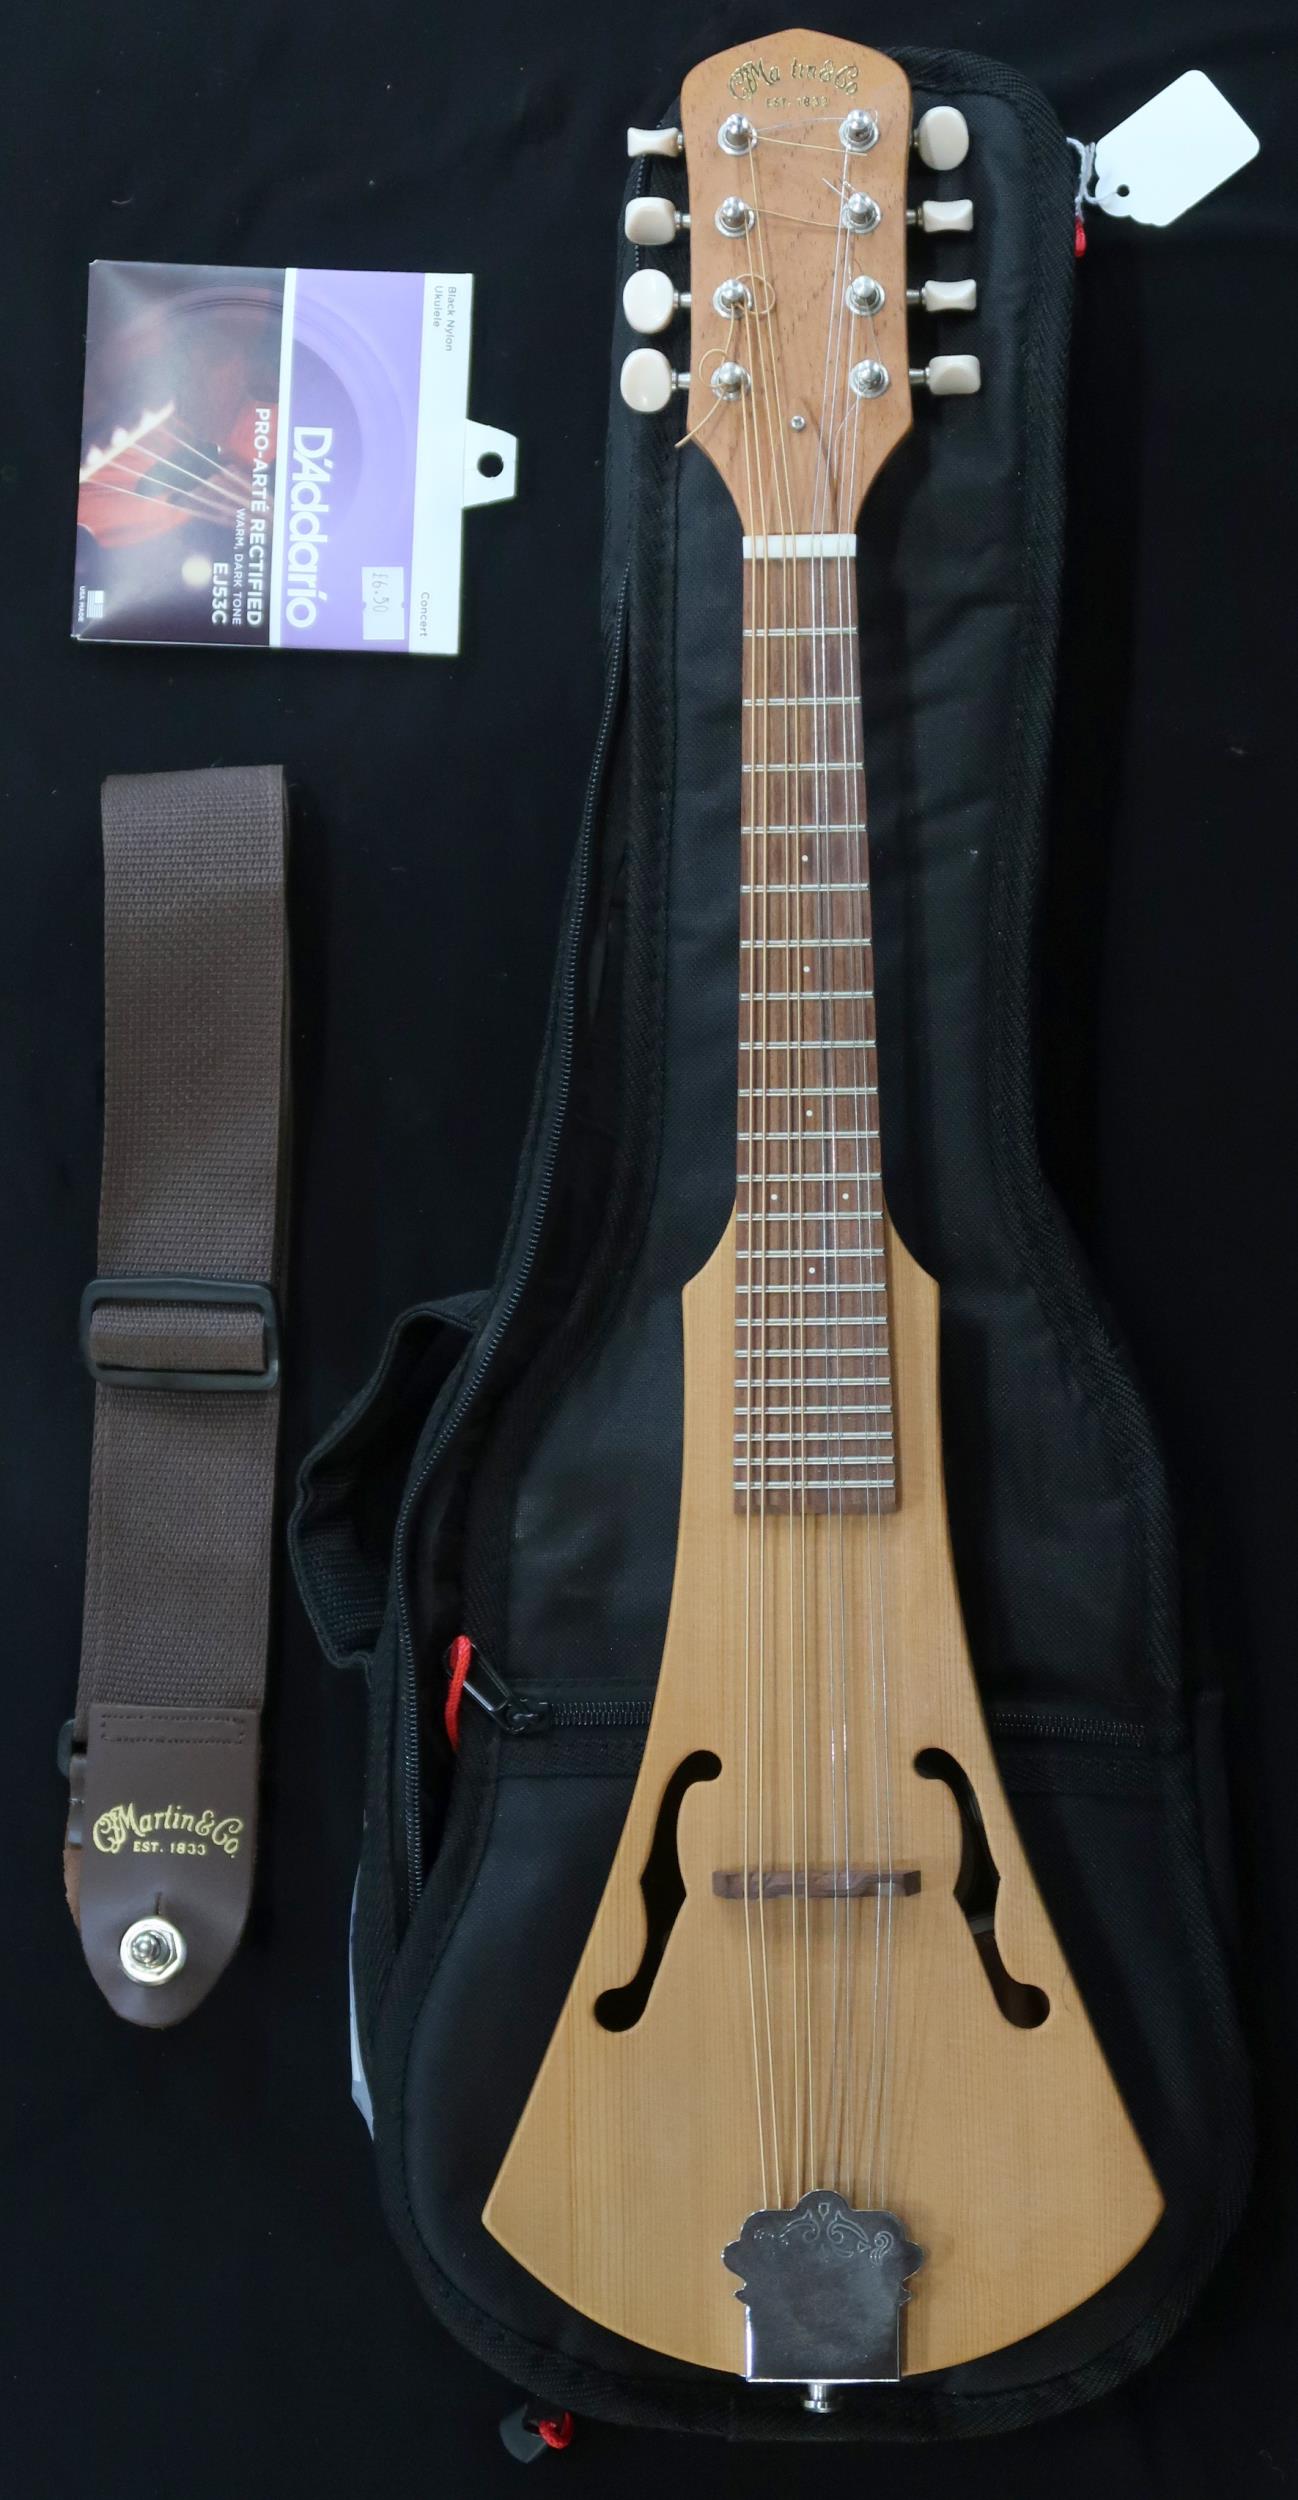 A CF Martin & Co backpacker mandolin serial number 170366 with a soft case and strap Condition